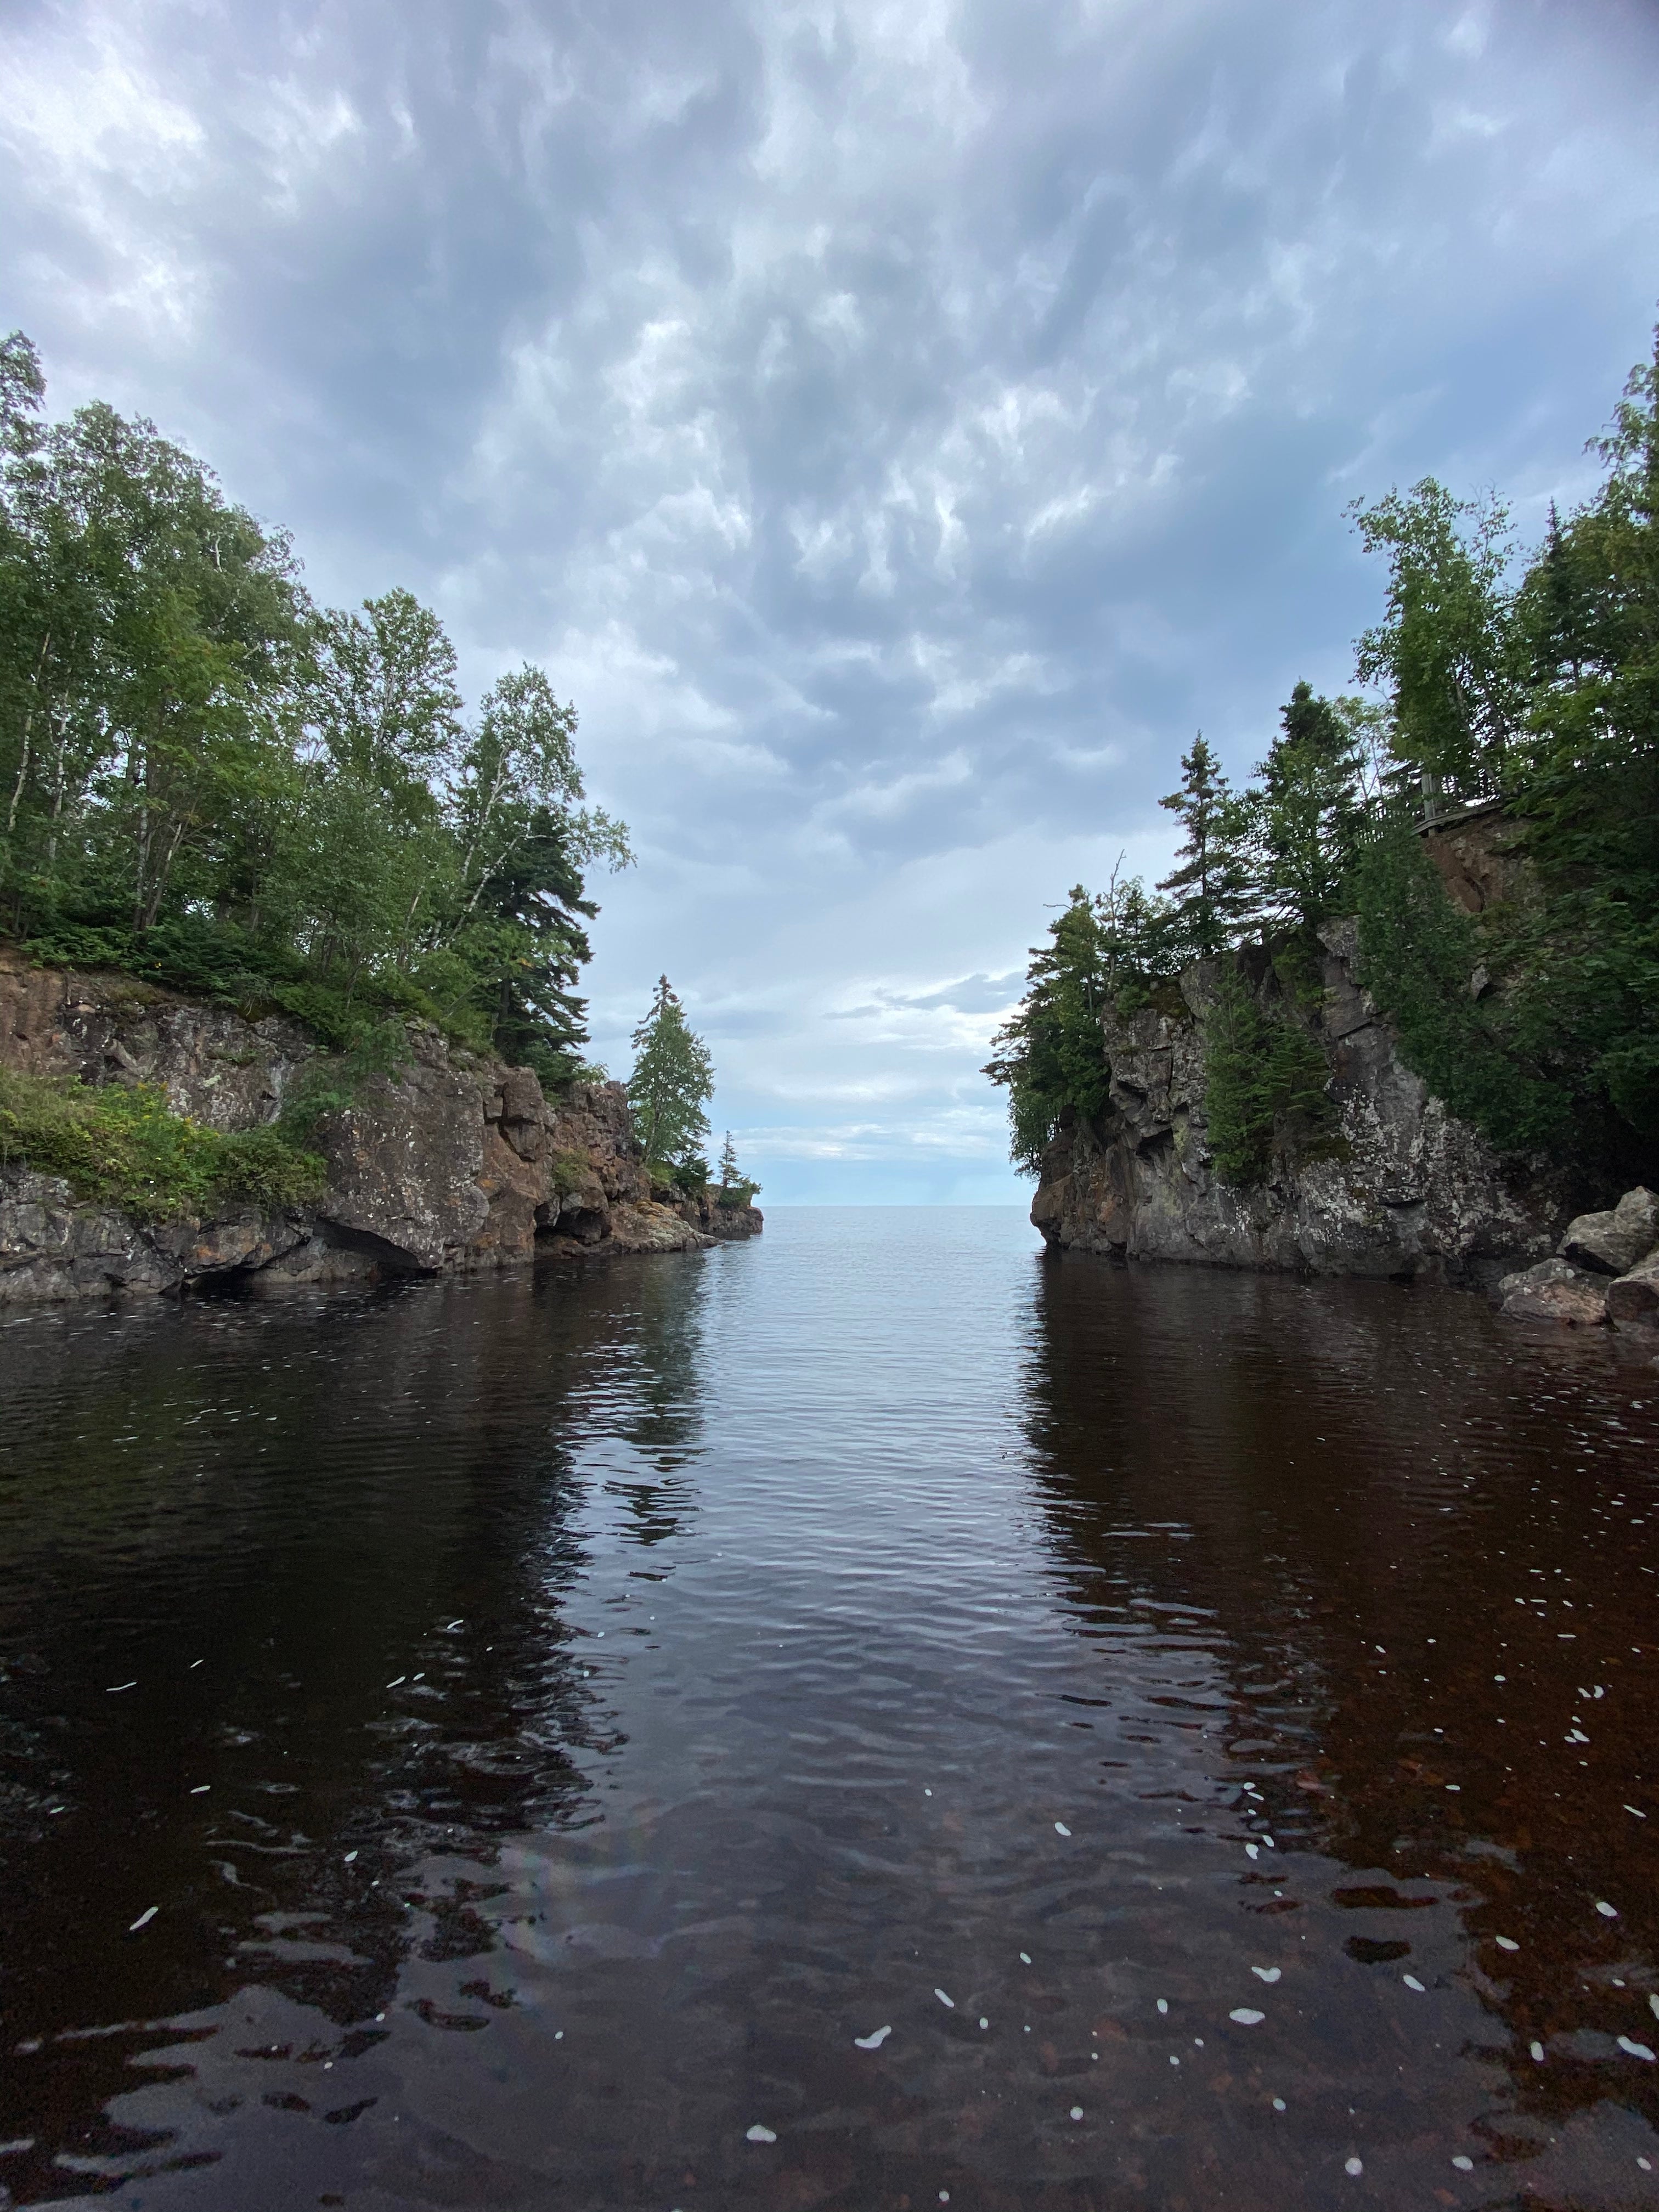 the outlet of Temperance River into Lake Superior